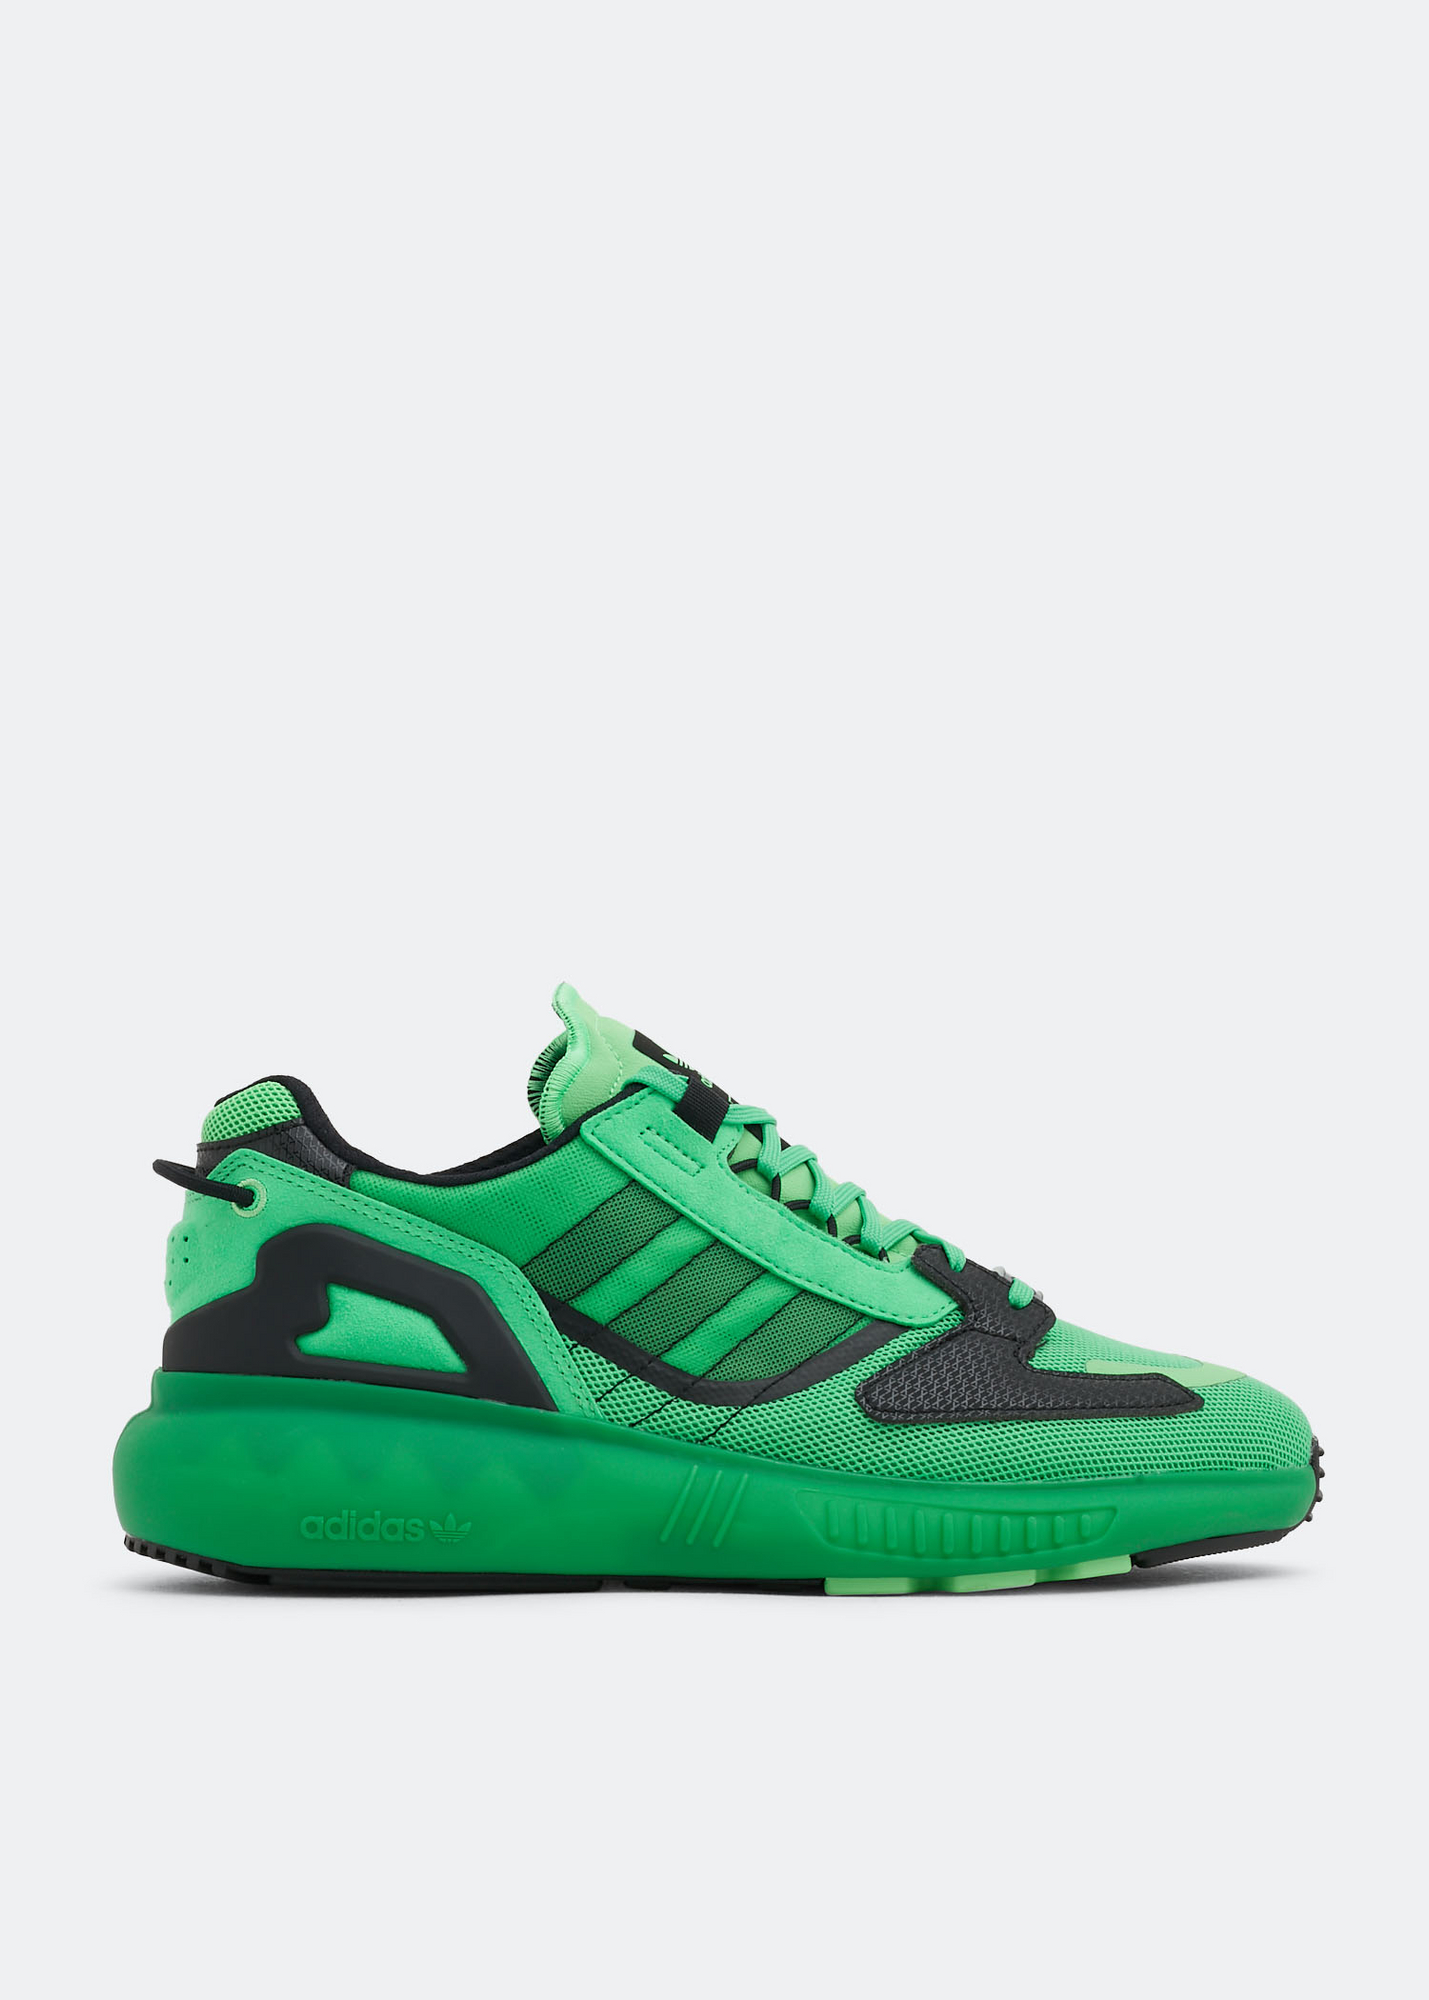 Adidas ZX 5K Boost sneakers for Men - Green in UAE | Level Shoes